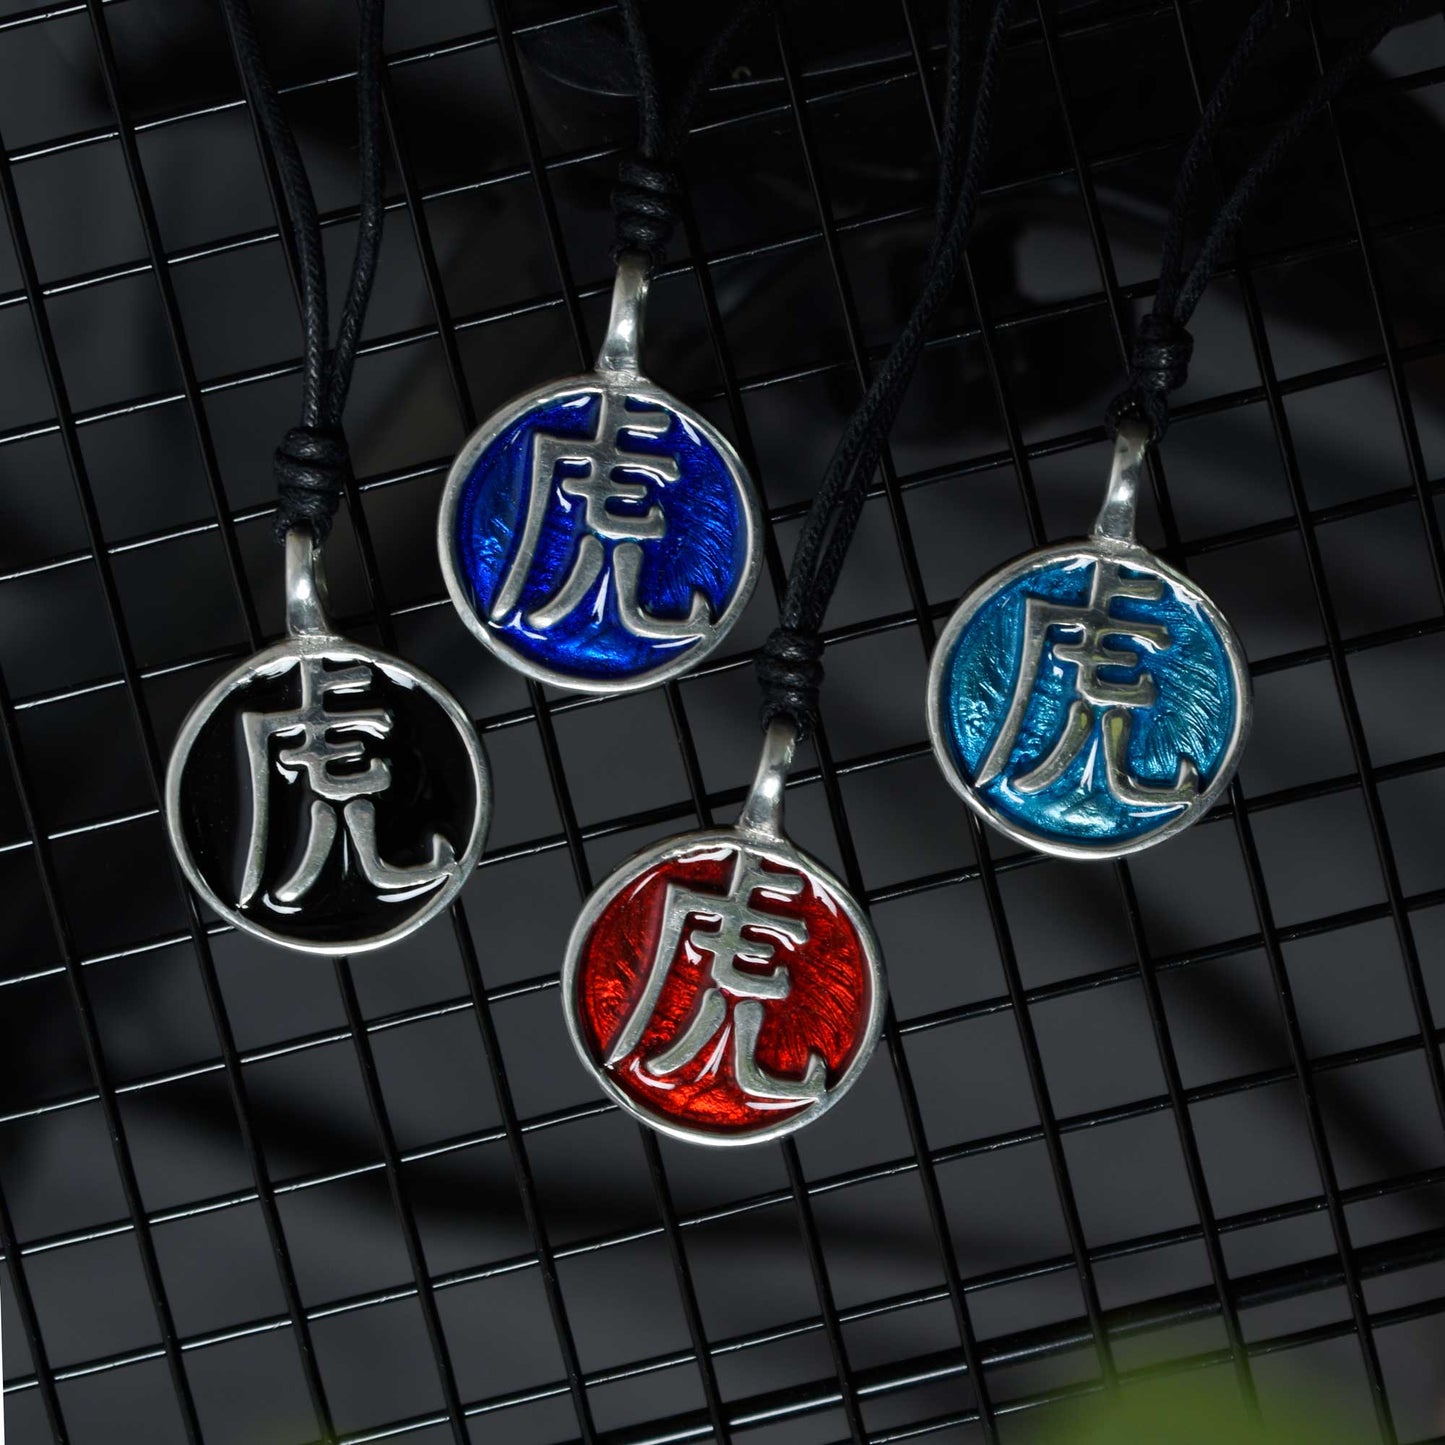 Chinese Year of the Tiger Zodiac Silver Pewter Charm Necklace Pendant Jewelry